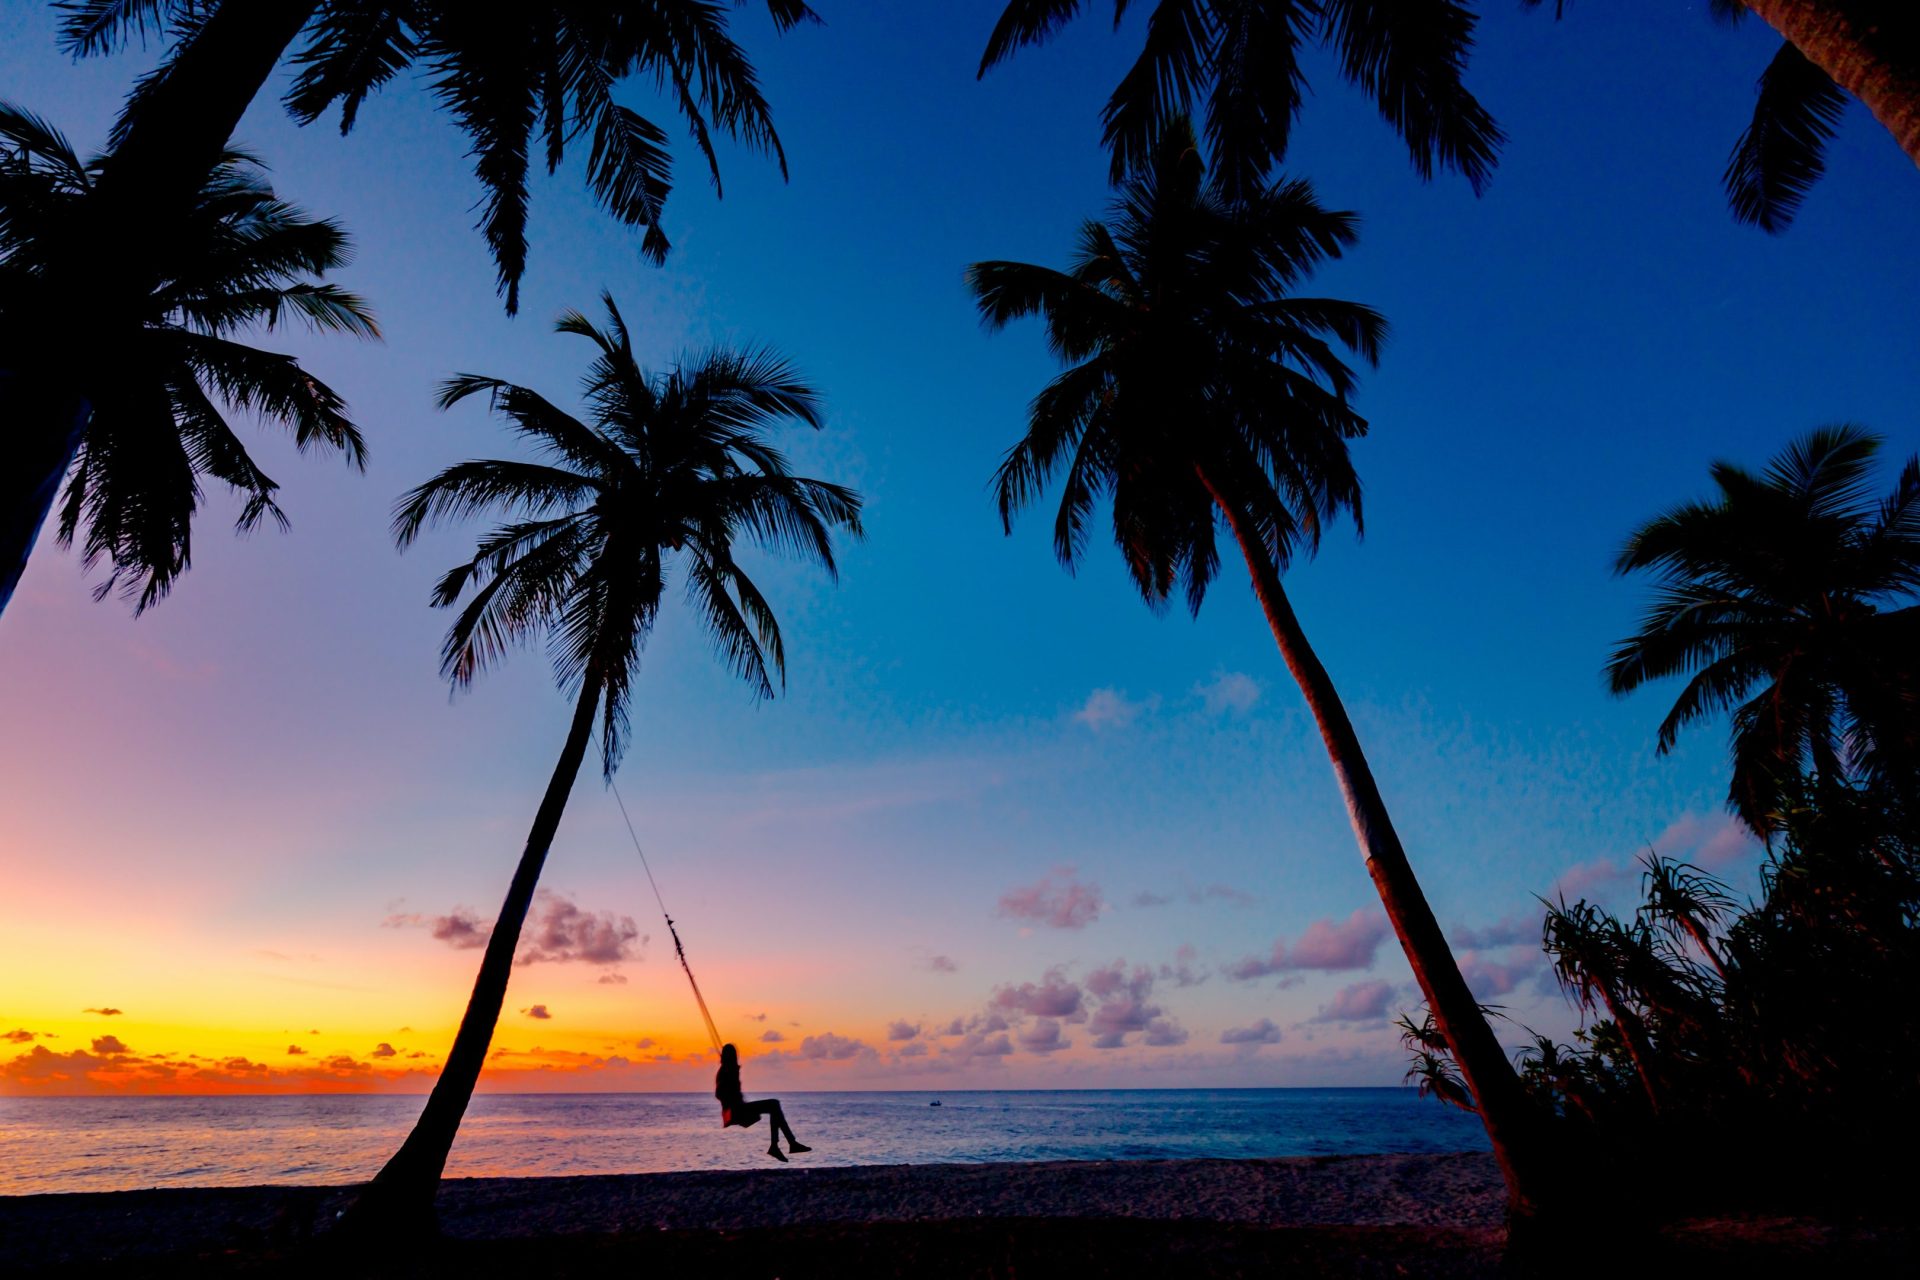 Photo of beach at night with coconut trees and a woman in a swing